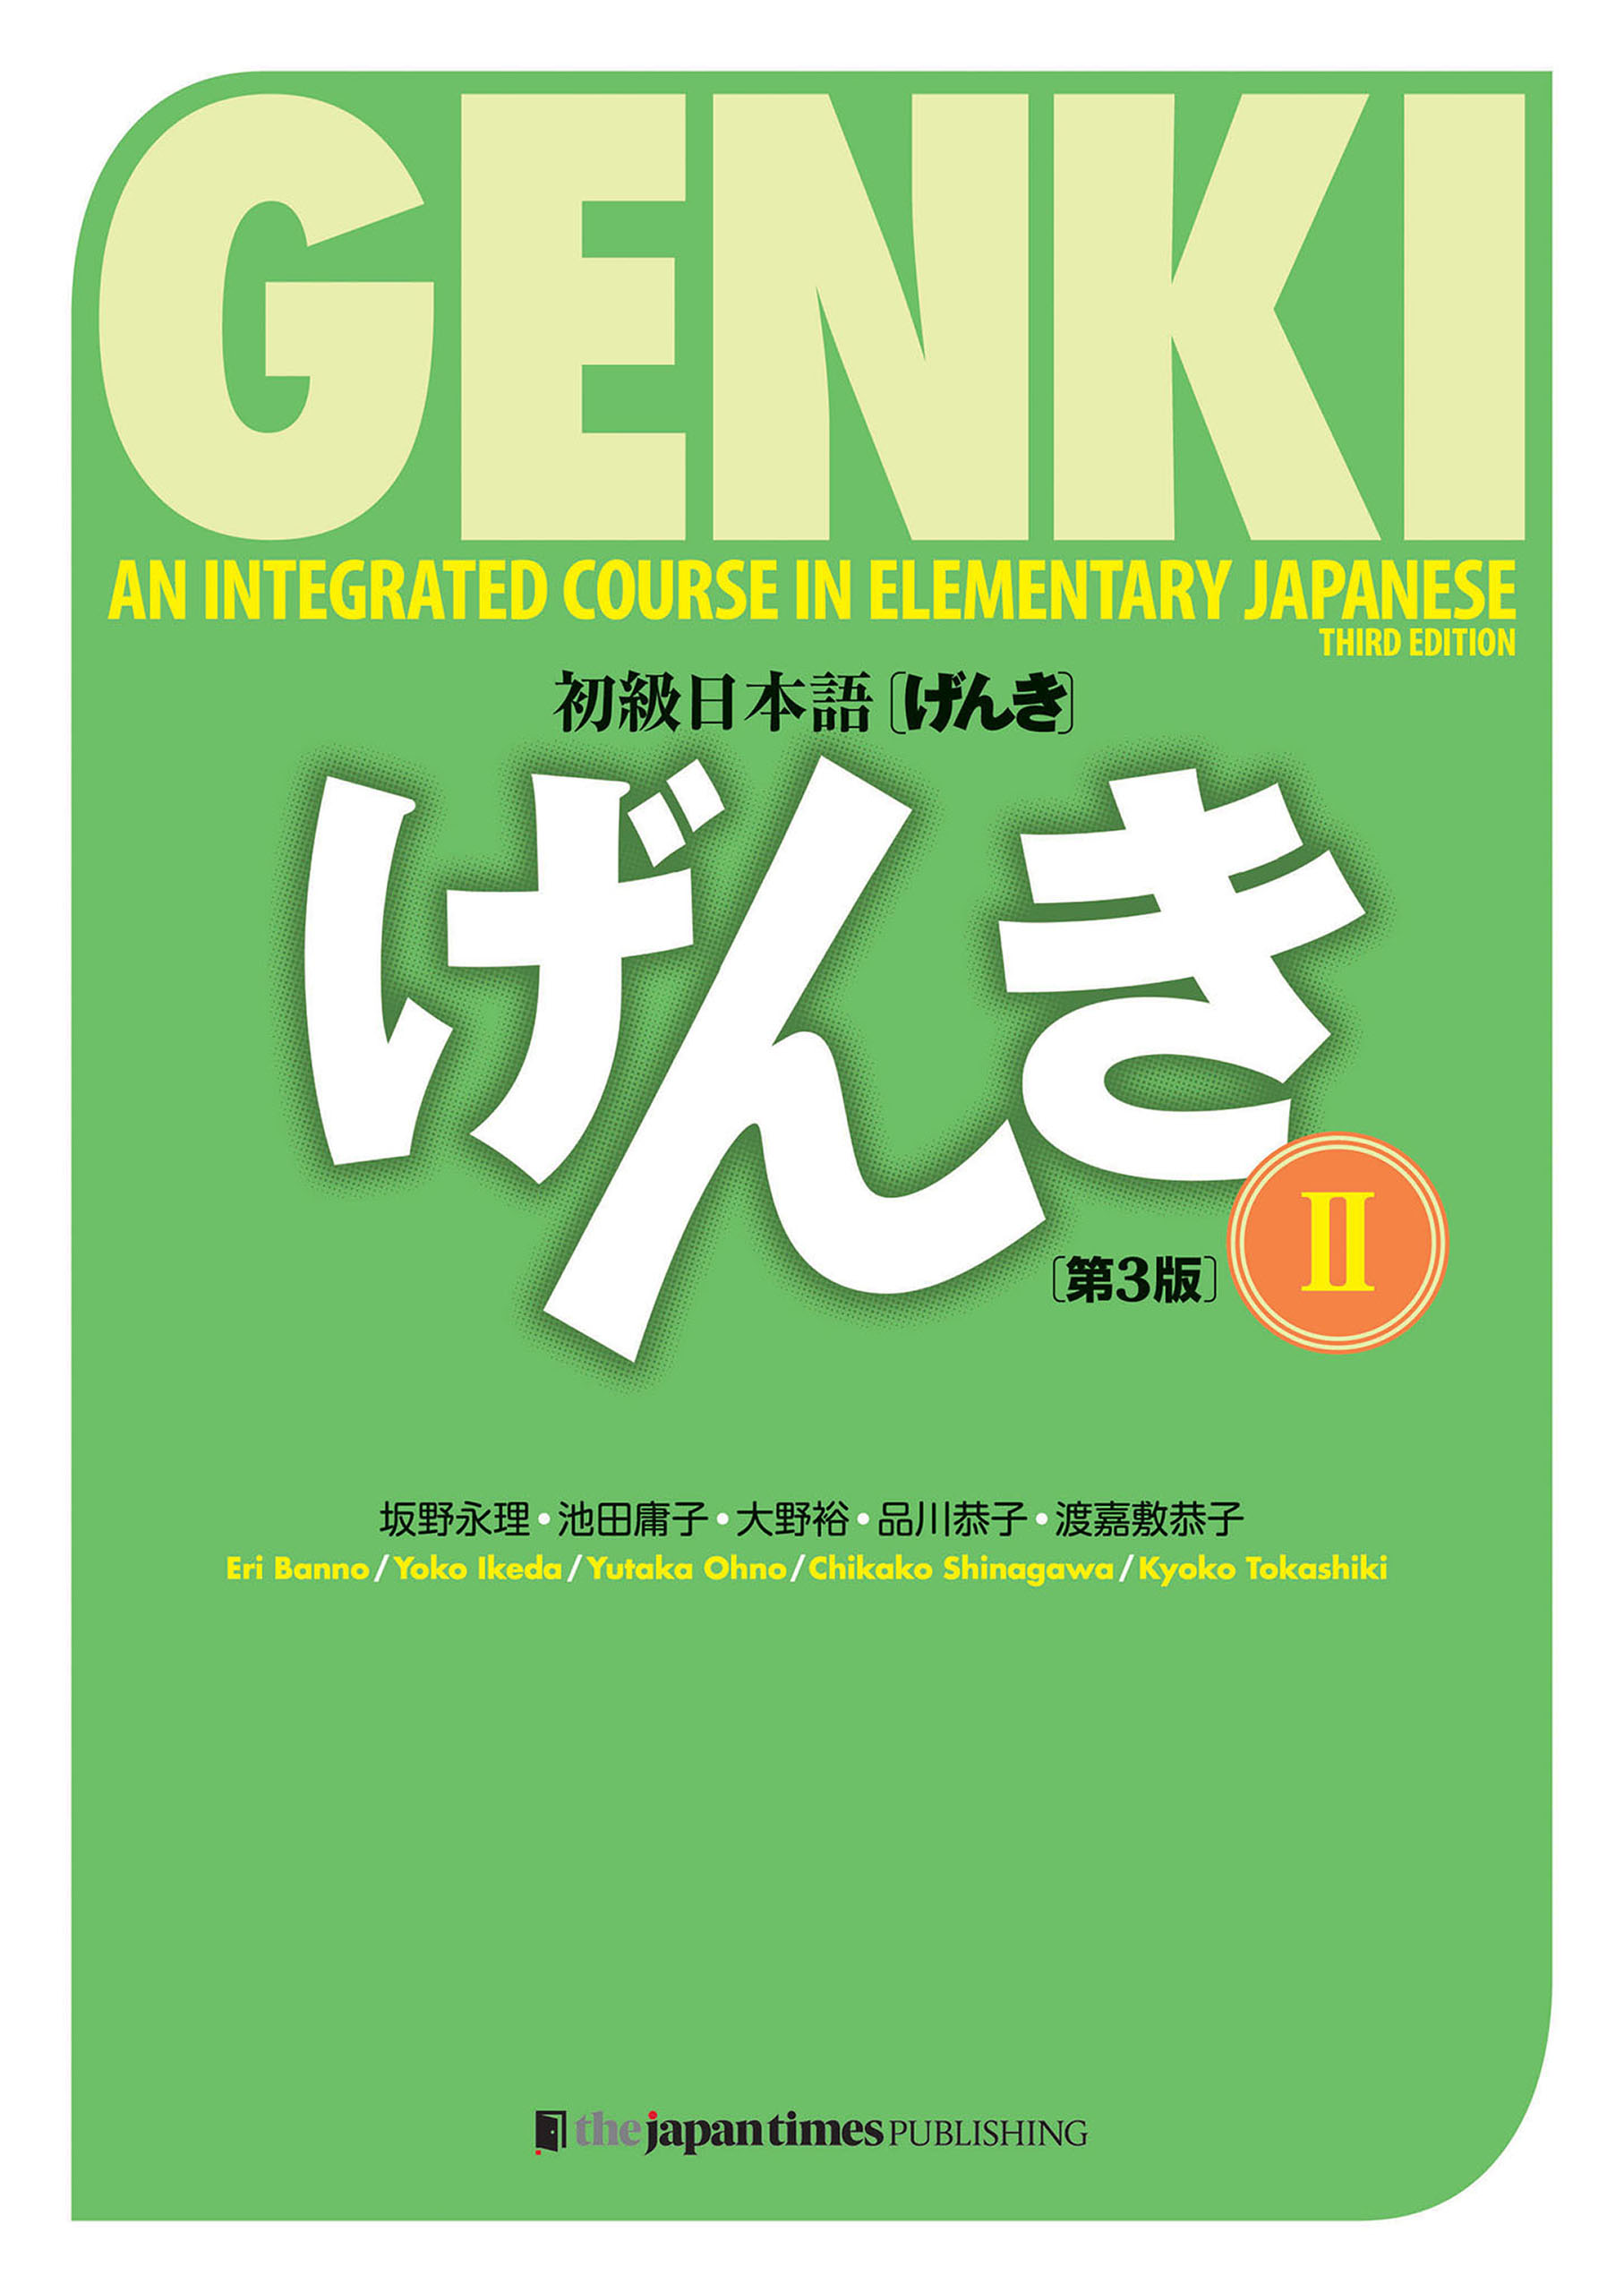 GENKI: An Integrated Course in Elementary Japanese 2 [Third Edition]初級日本語  げんき2【第３版】 - 坂野永理/池田庸子 - ビジネス・実用書・無料試し読みなら、電子書籍・コミックストア ブックライブ